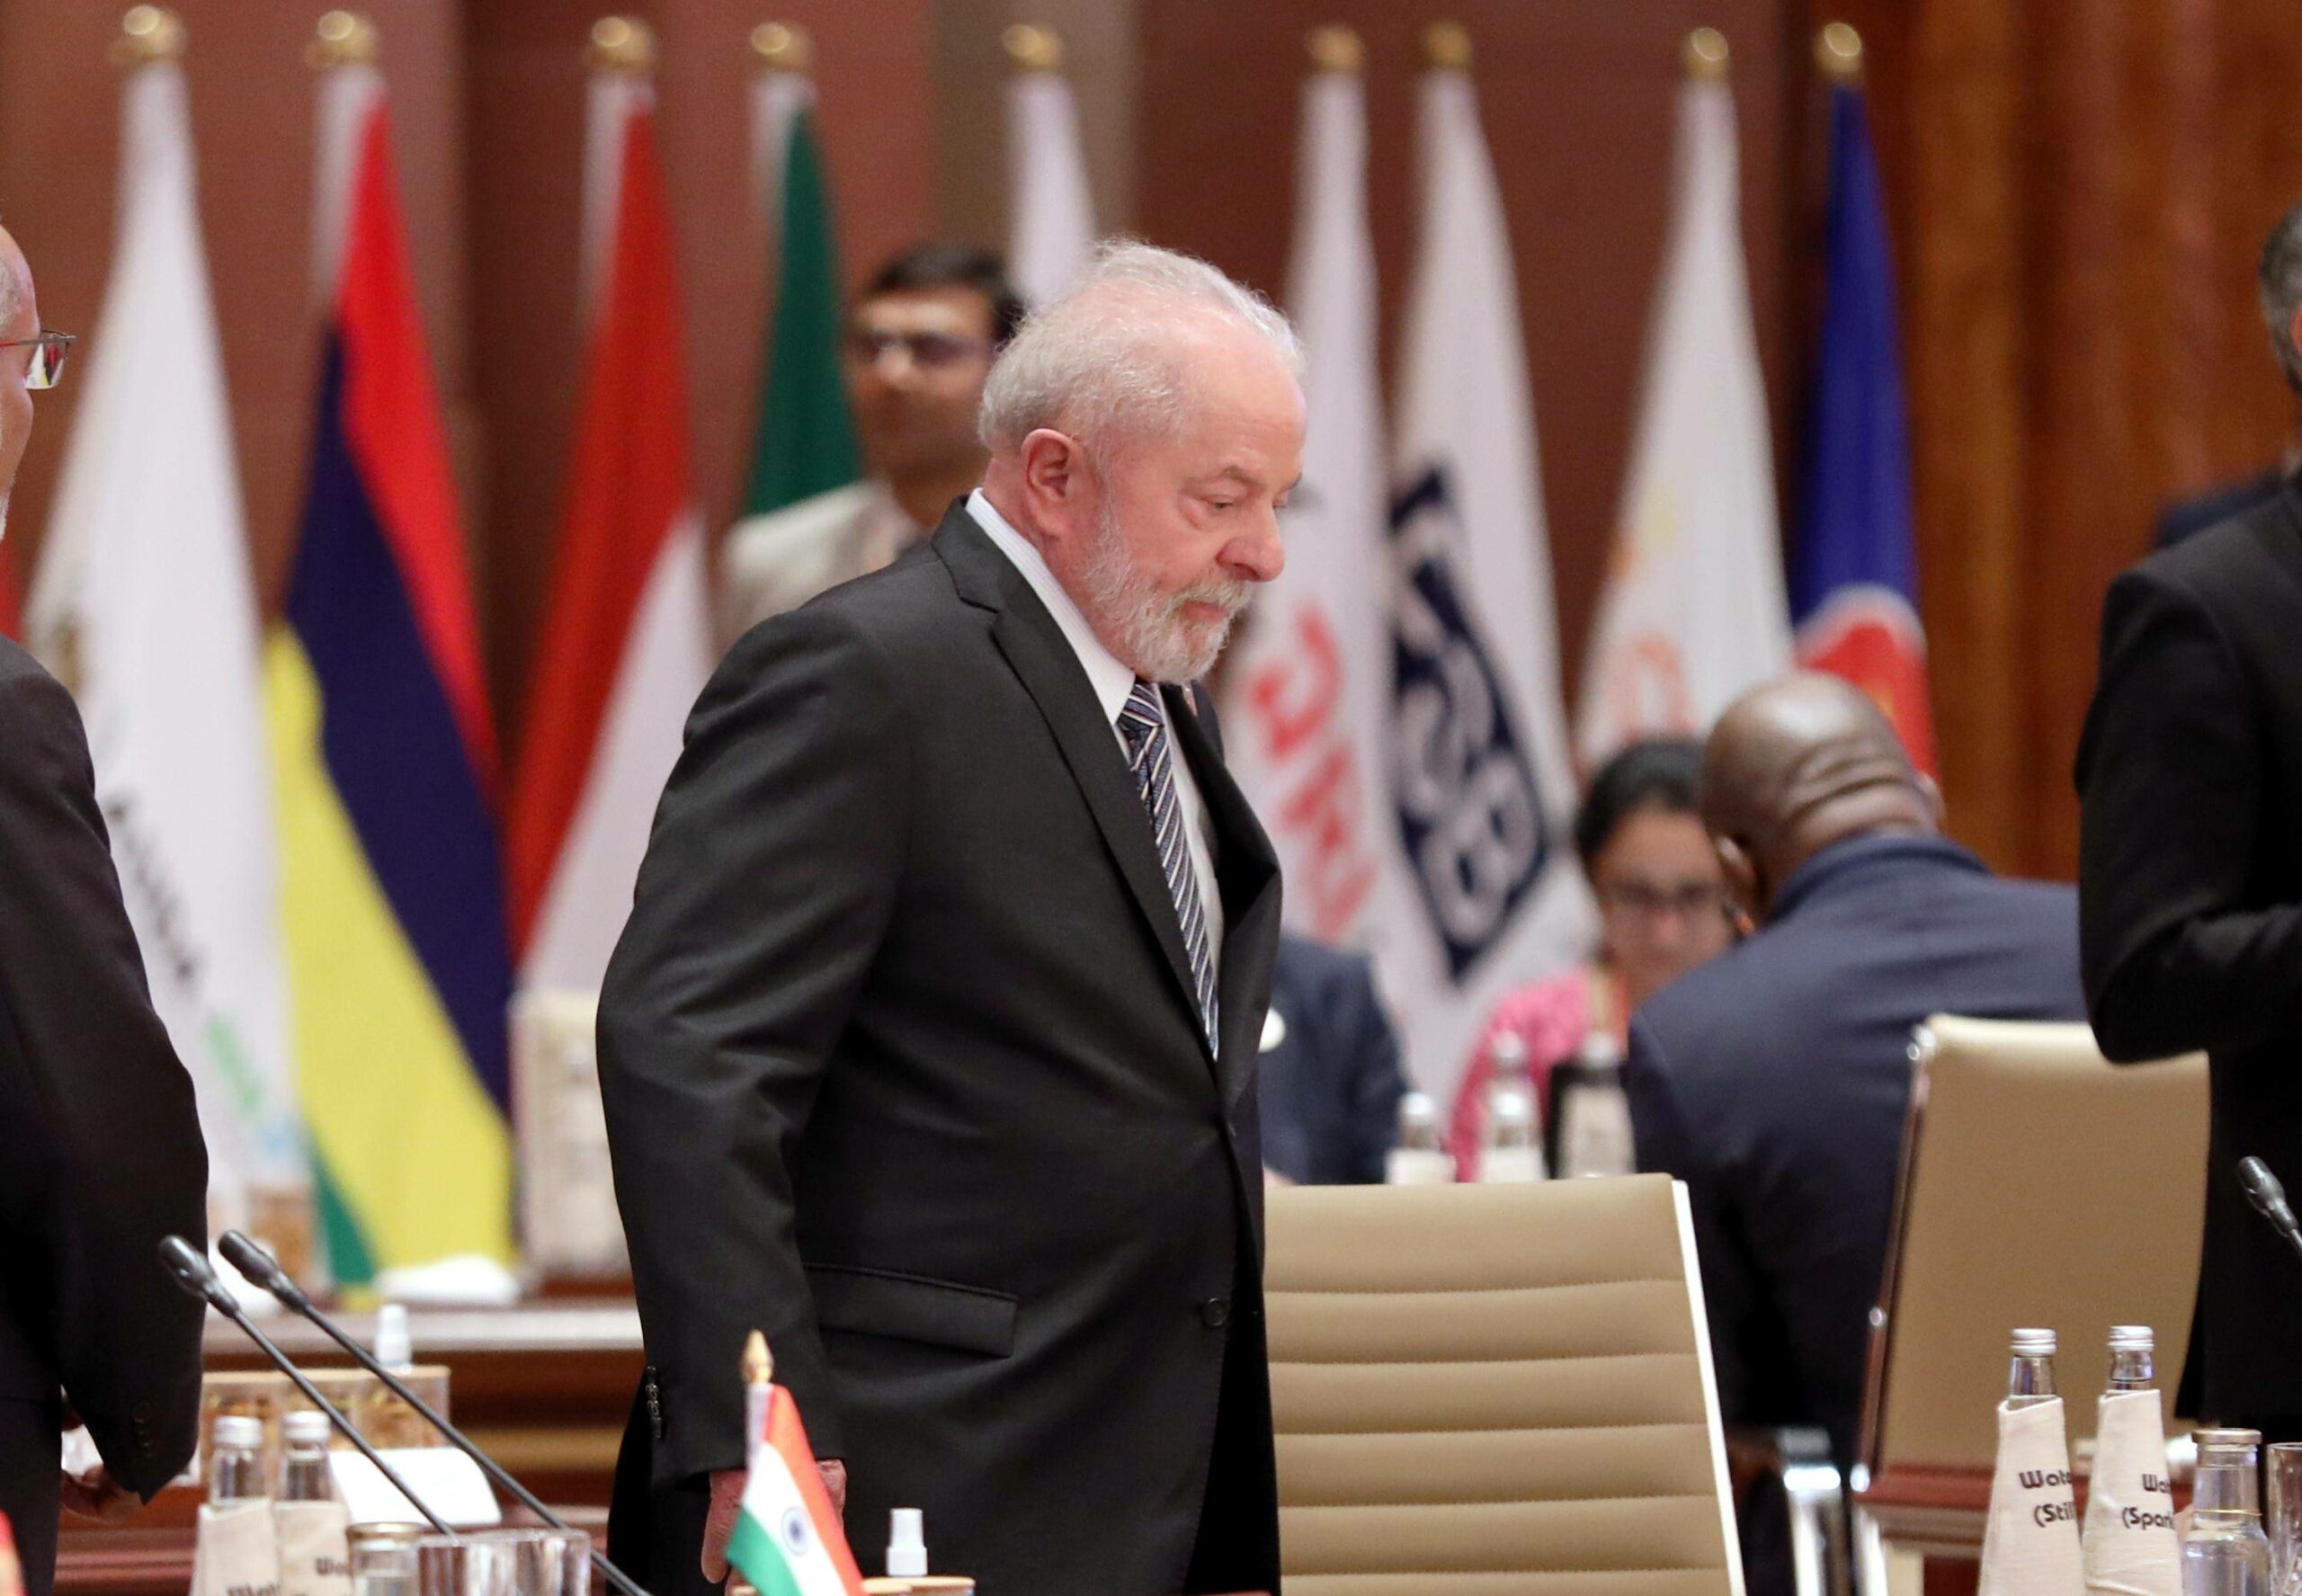 Biden and Lula express concern about Milei at G-20 Summit